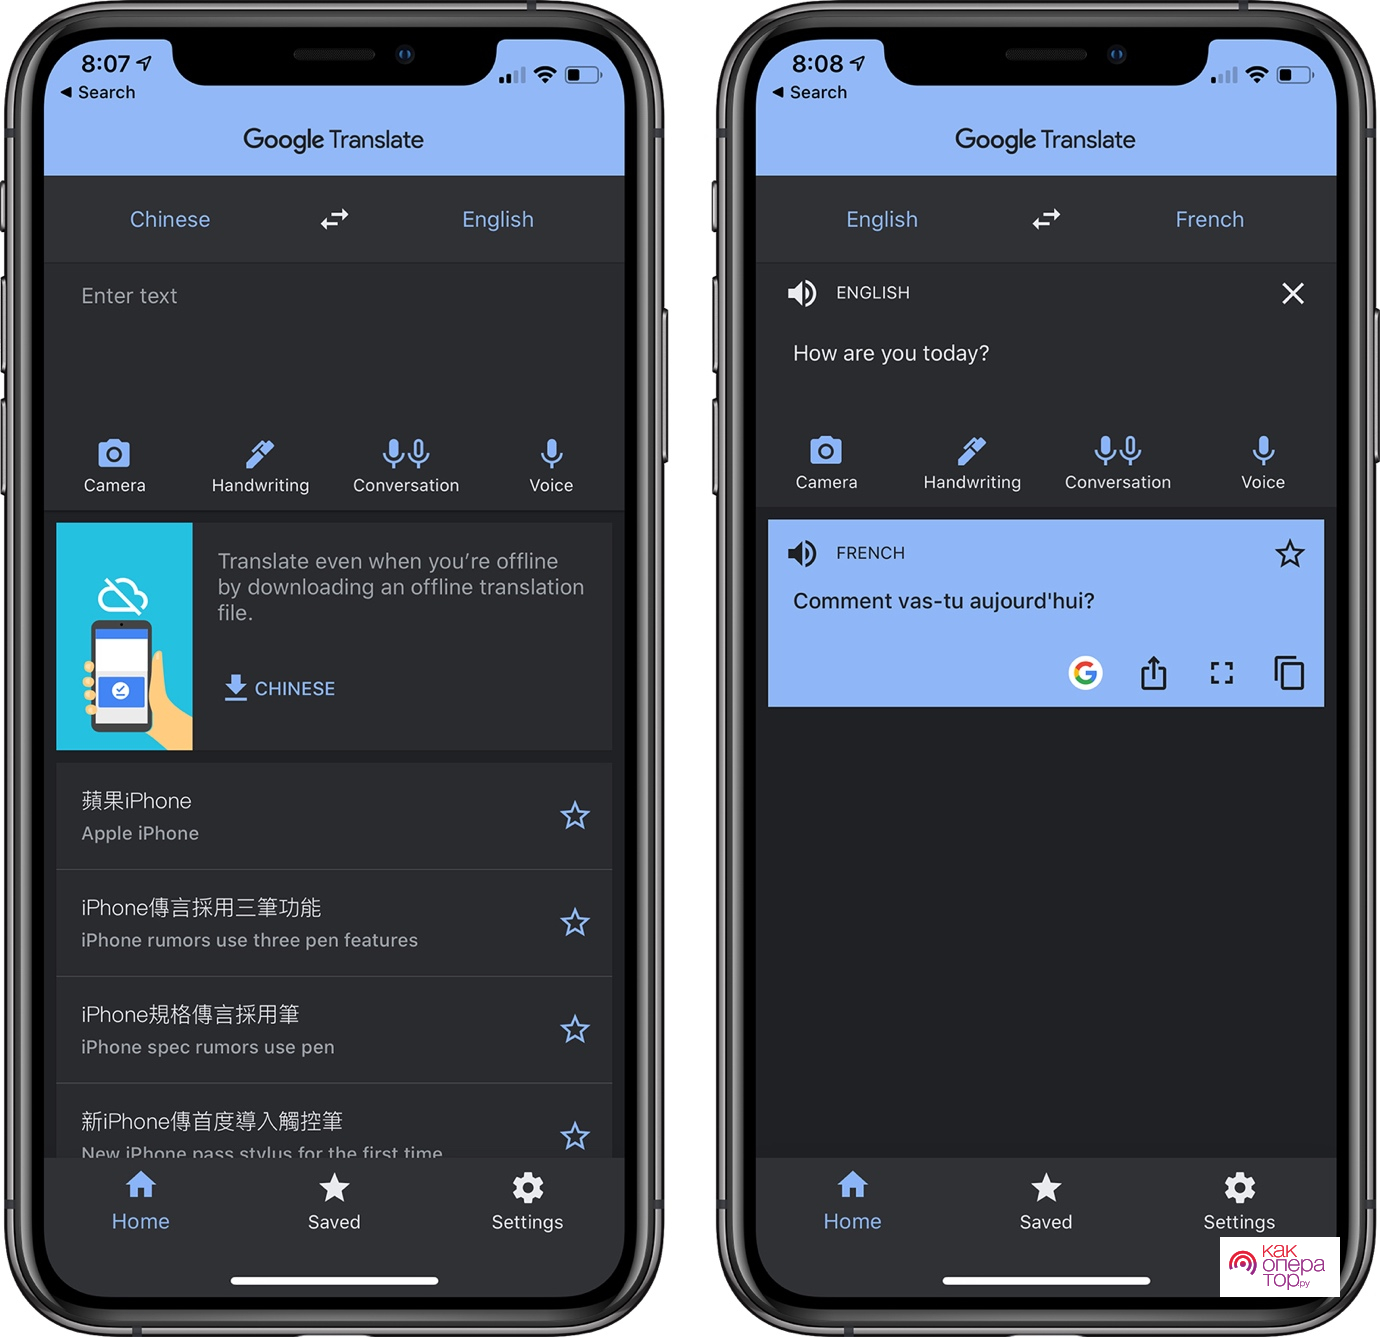 Google Translate App Updated With Dark Mode Support on iPhone and iPad | DevsDay.ru